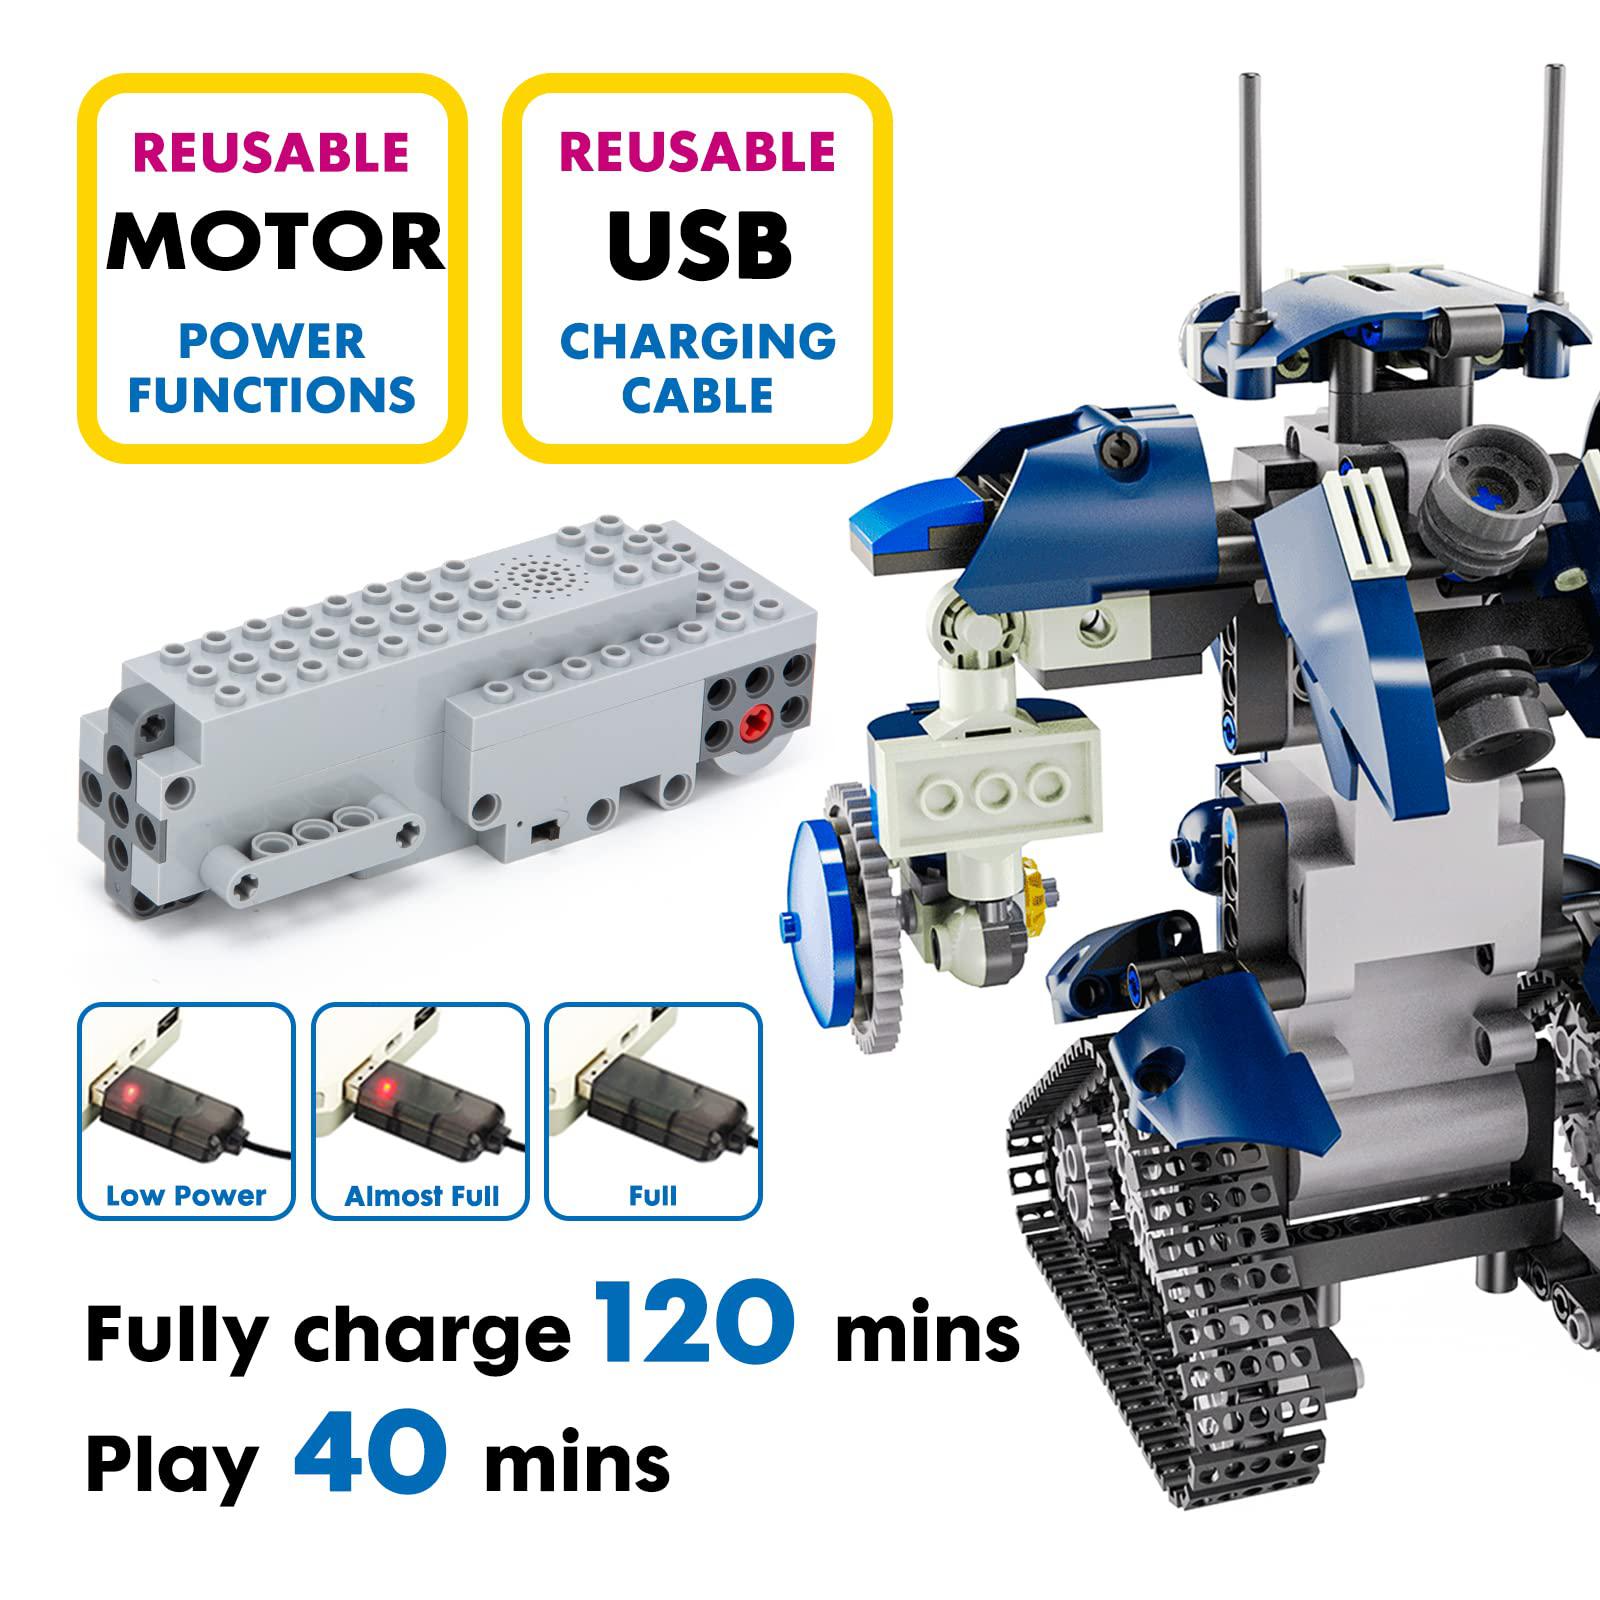 GP TOYS educiro robot building kit, toys for 6-12 year old boys girls, stem projects birthday gifts idea for kids 8 9 10 11 12 year o